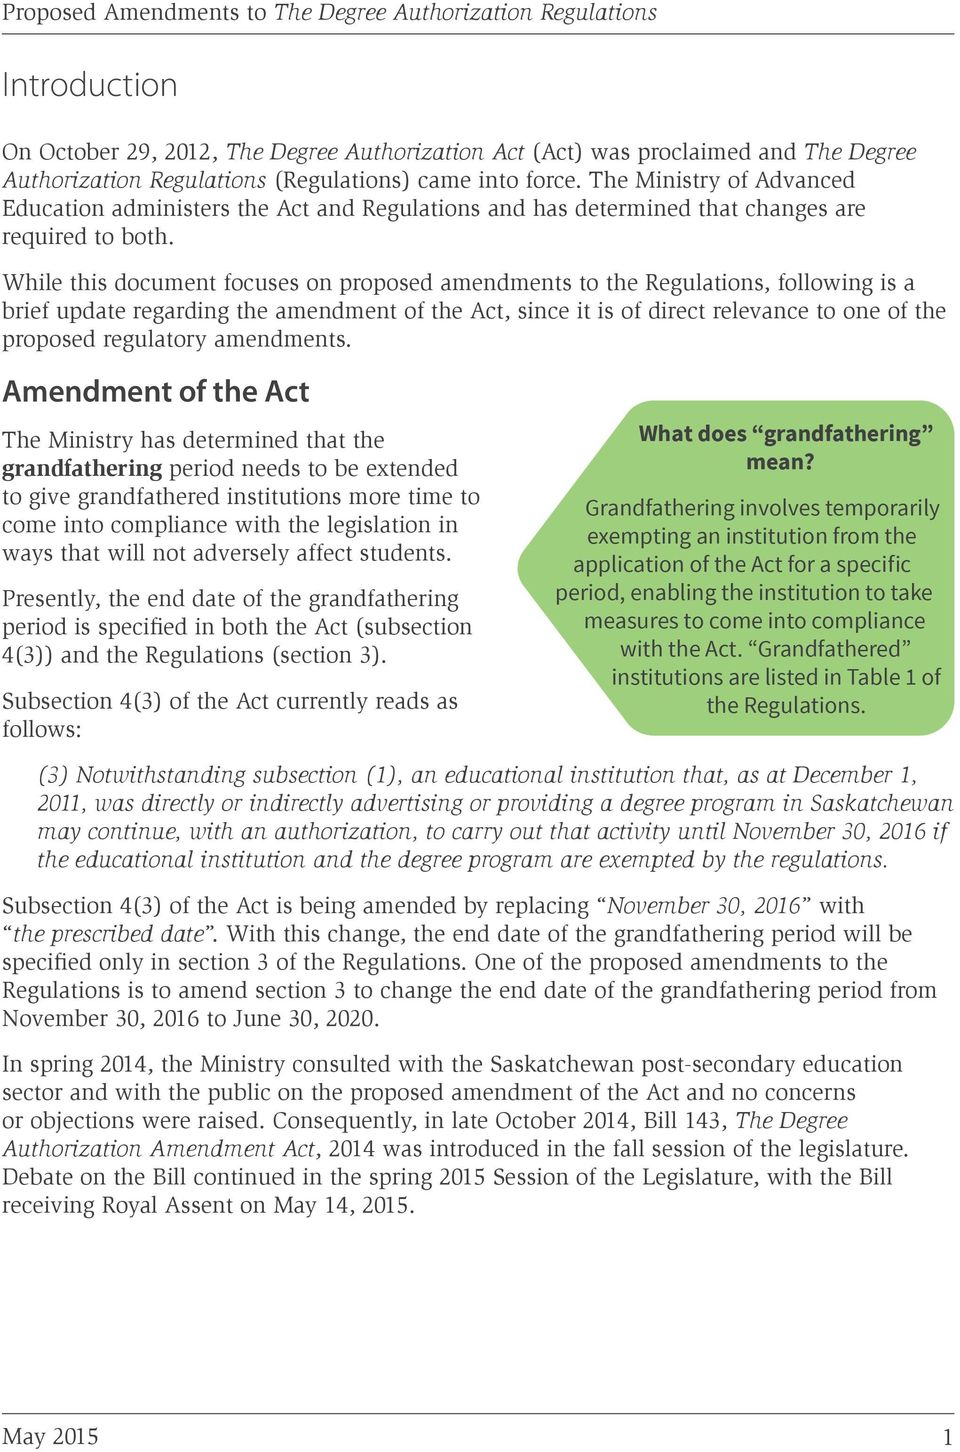 While this document focuses on proposed amendments to the Regulations, following is a brief update regarding the amendment of the Act, since it is of direct relevance to one of the proposed